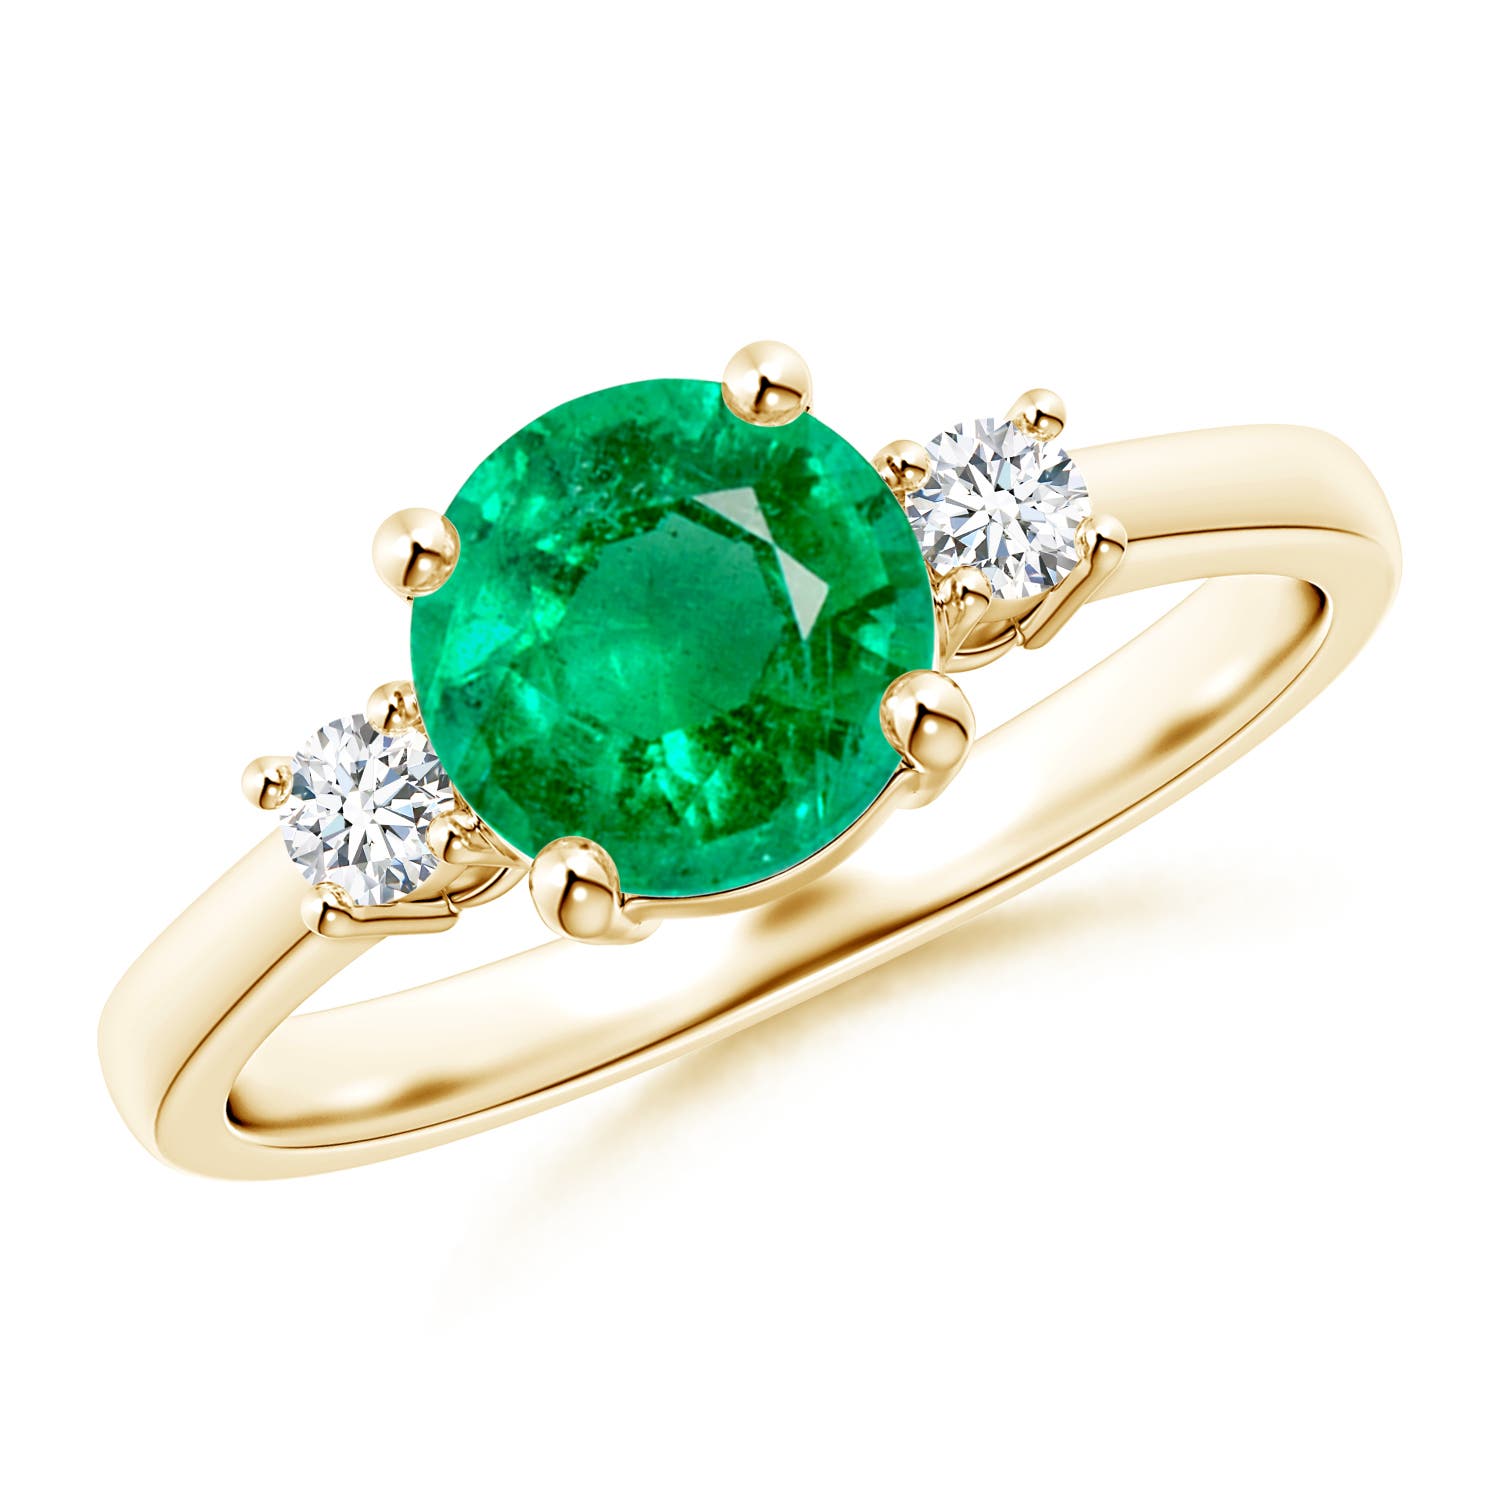 AAA - Emerald / 1.35 CT / 14 KT Yellow Gold